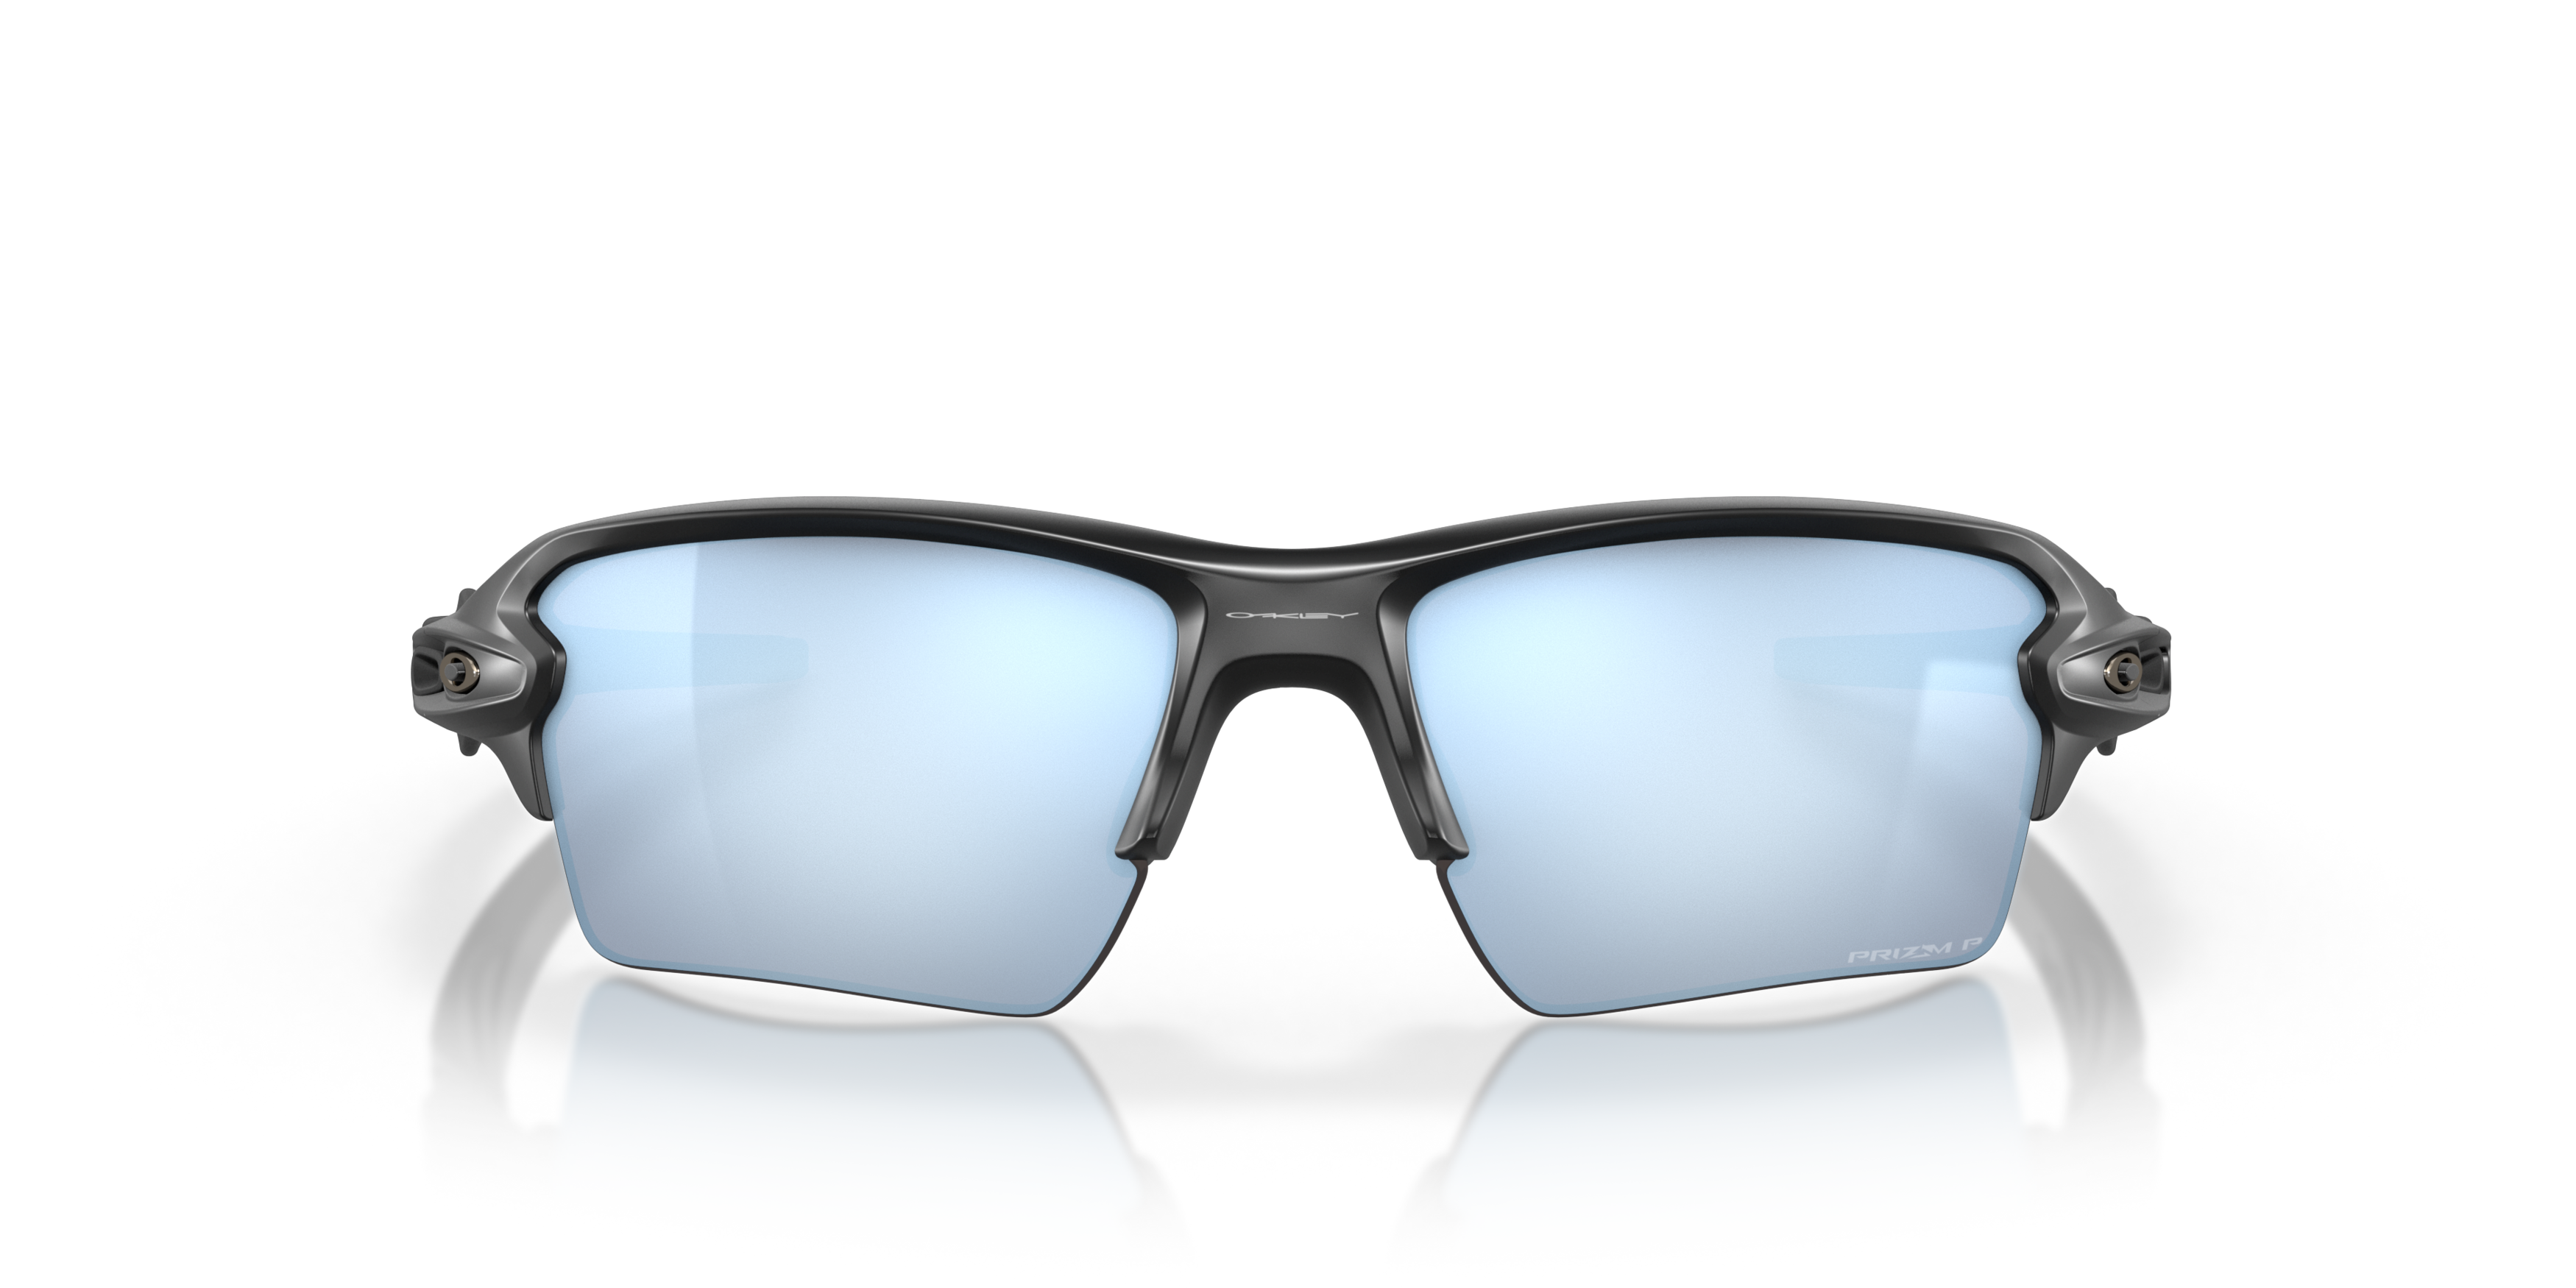 [products.image.front] Oakley Flak 2.0 XL OO 9188 Sunglasses